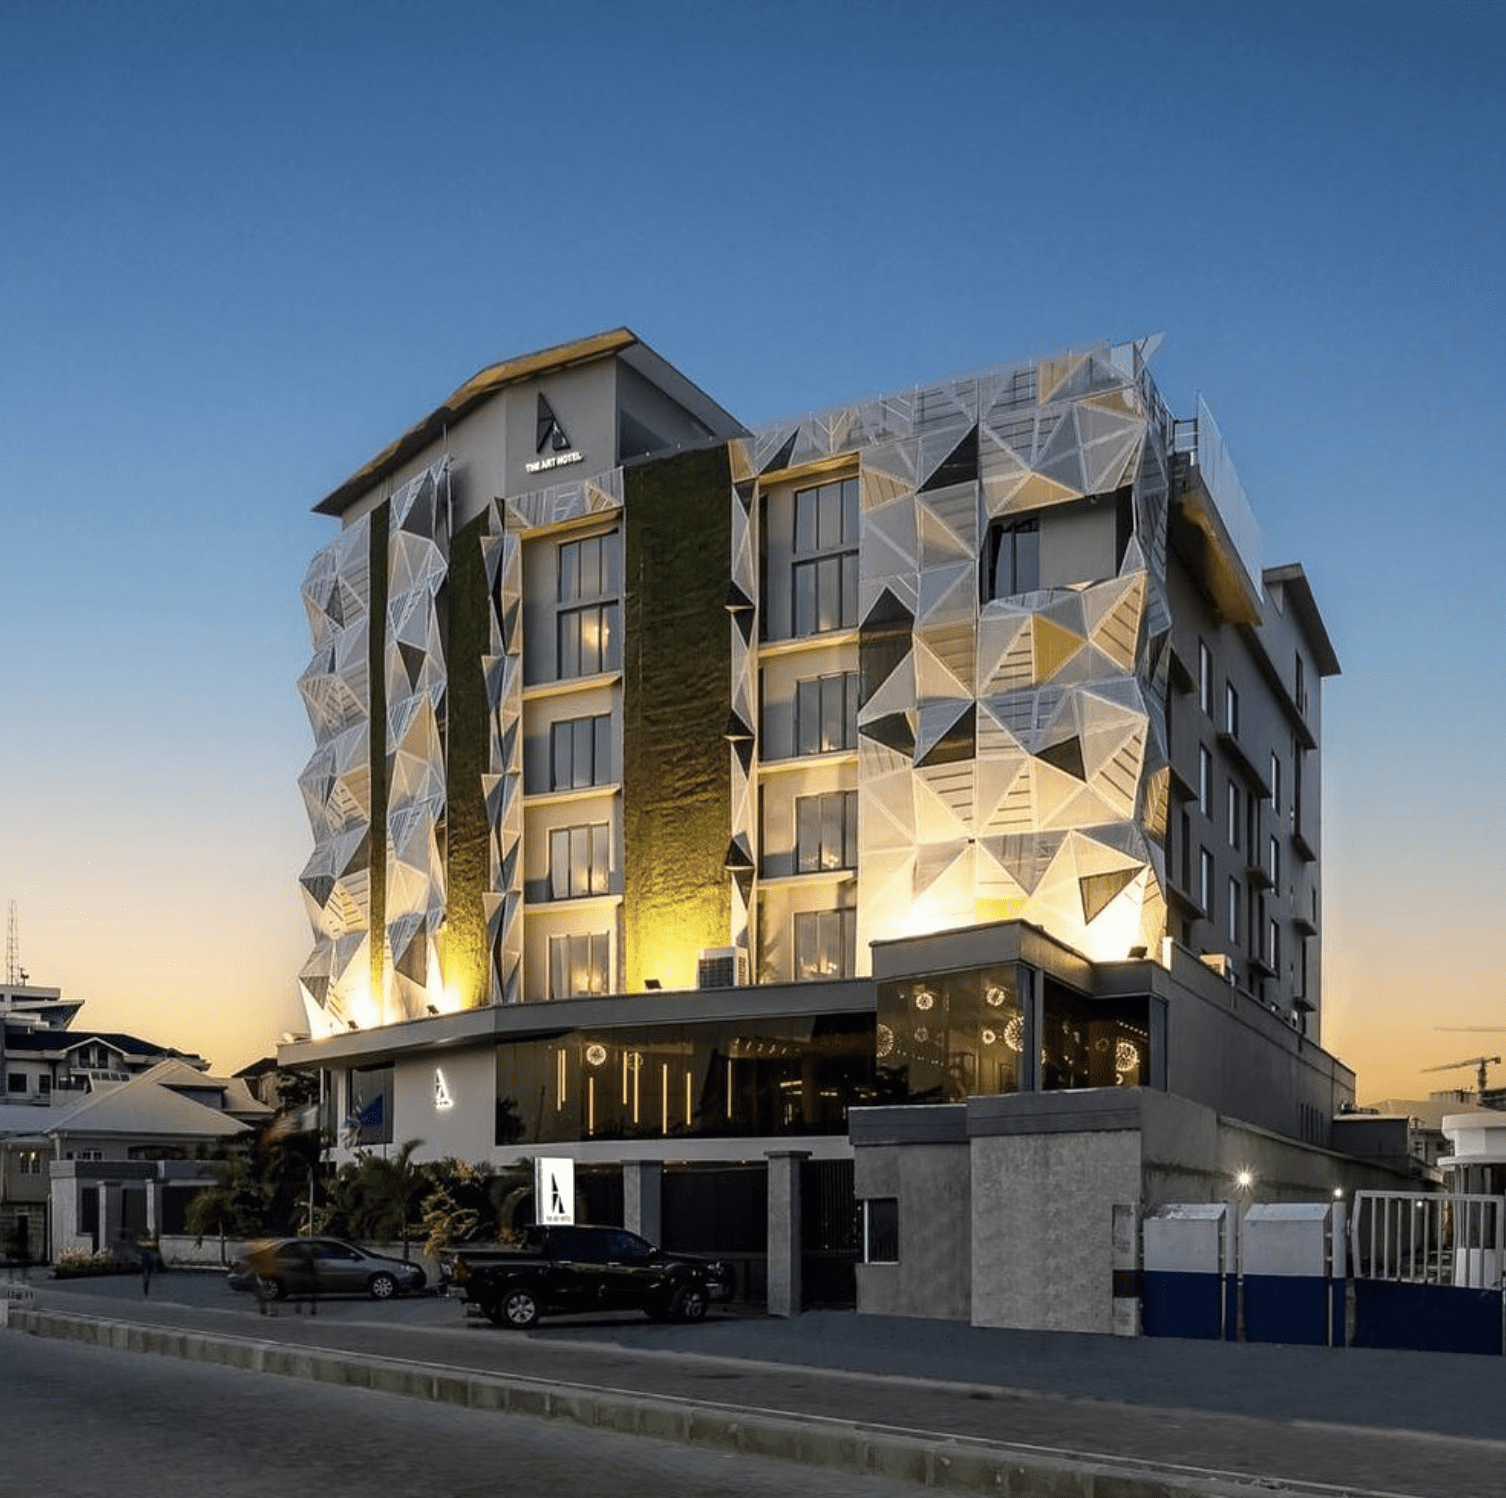 The best hotels in Lagos, Nigeria | striking exterior of the Arts Hotel with a geometric facade